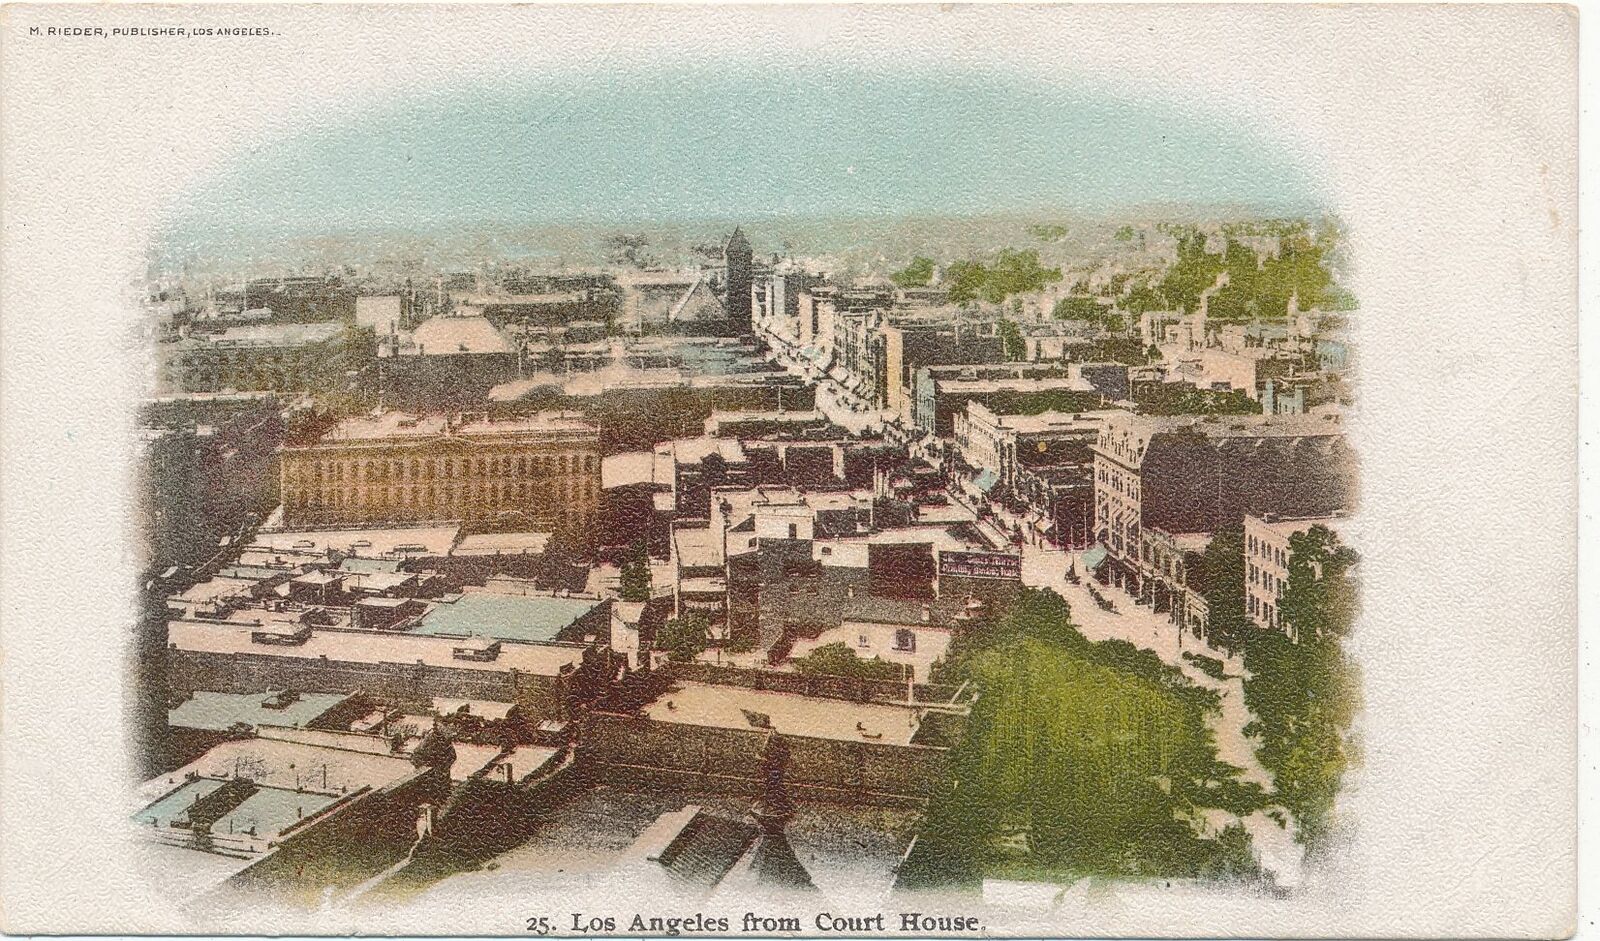 LOS ANGELES CA - Los Angeles From Court House Postcard - udb (pre 1908)